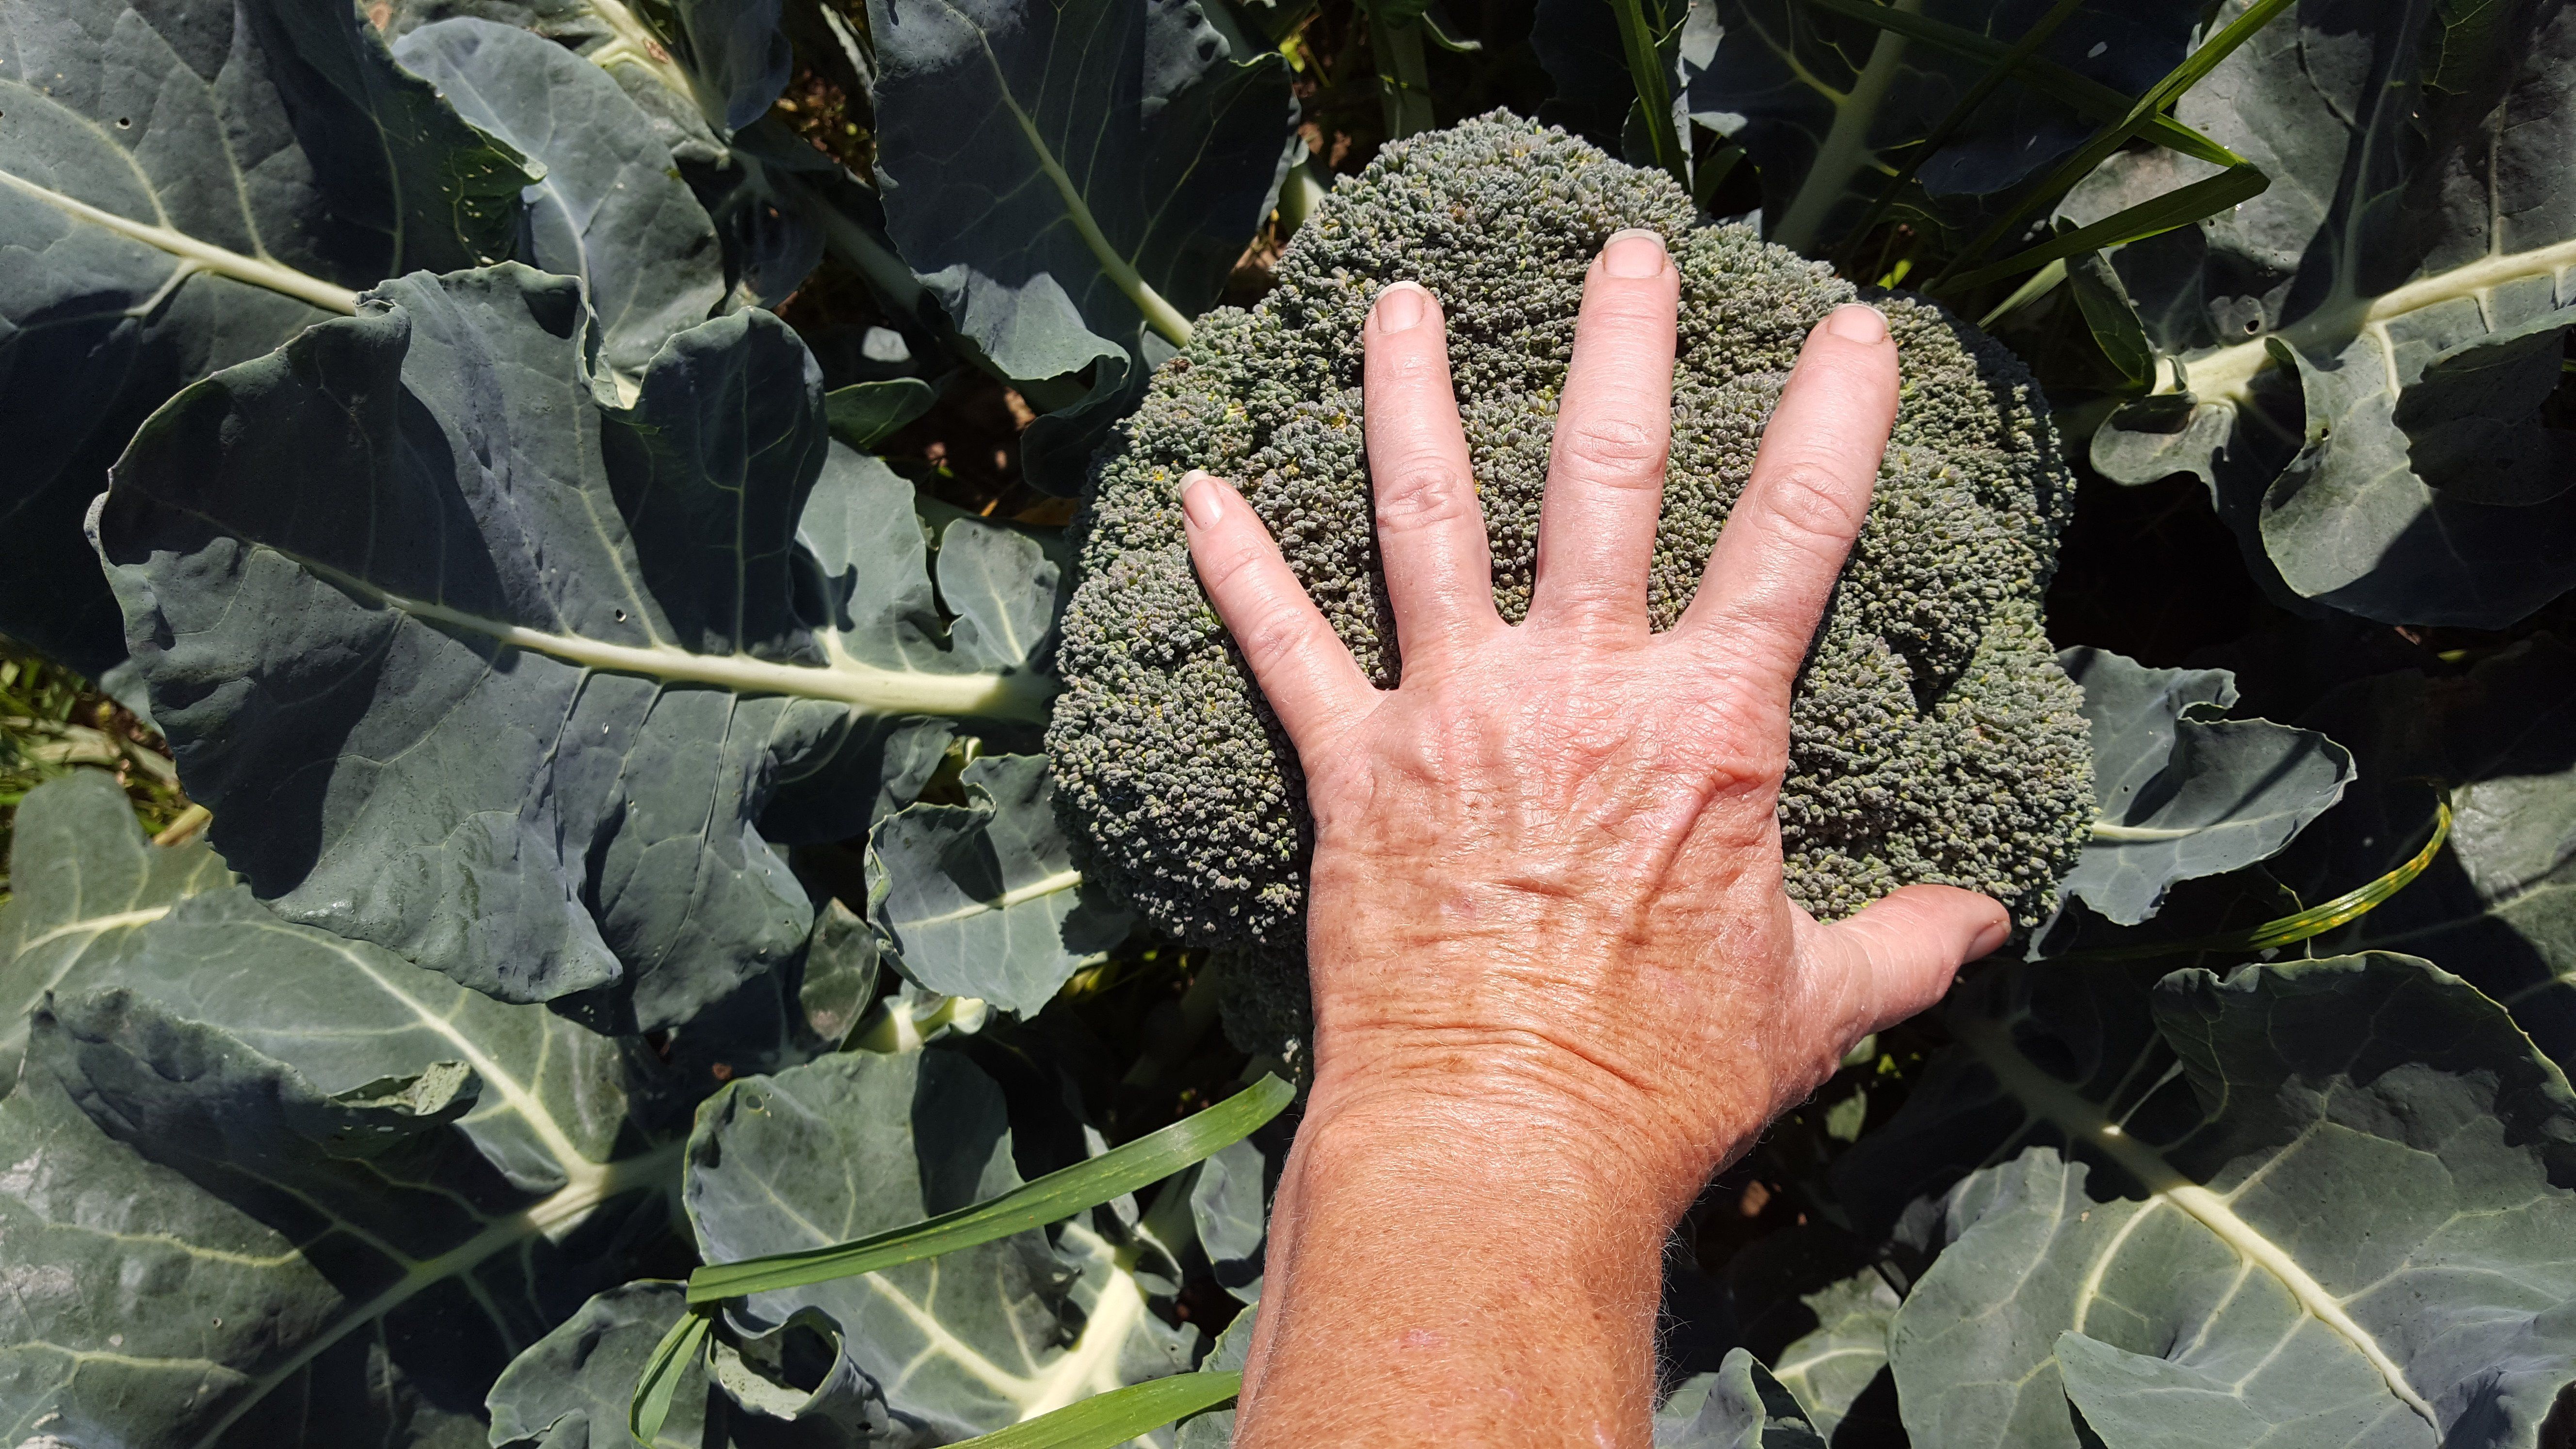 Previous Happening: Ginormous Broccoli